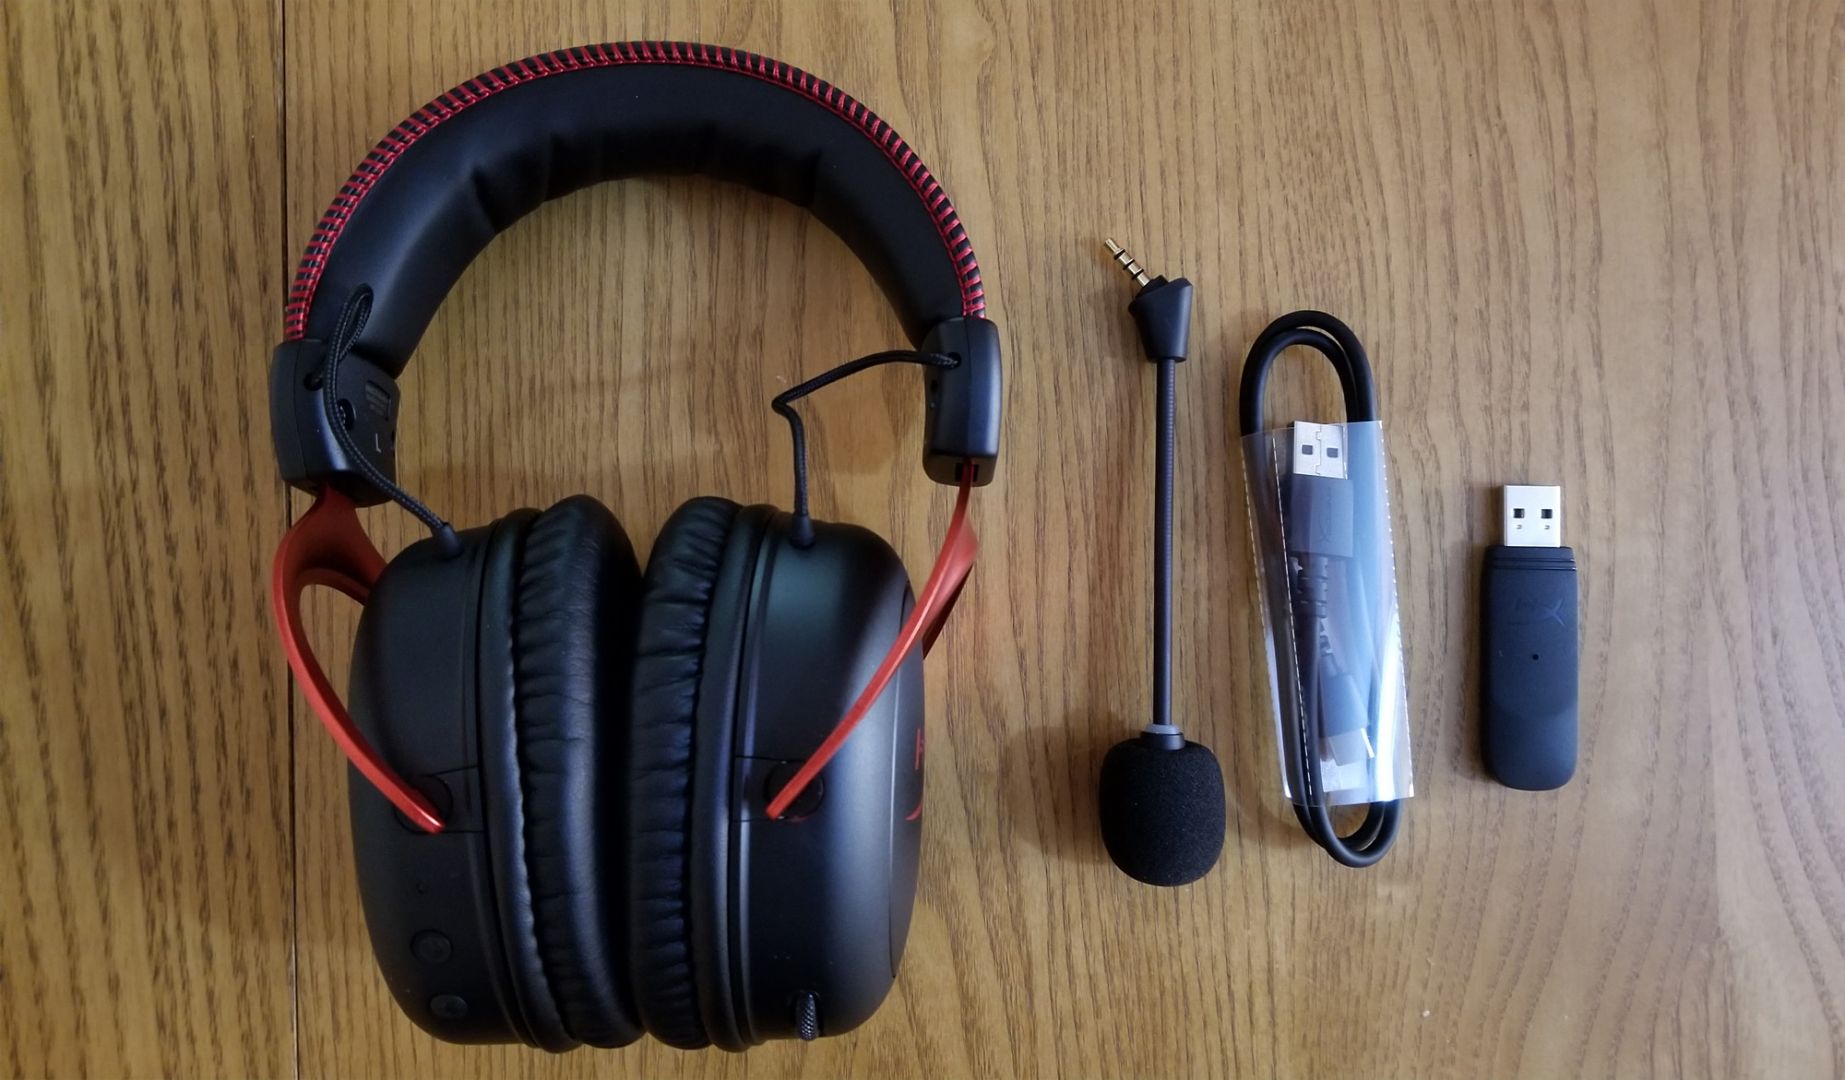 connecting hyperx headset to xbox one